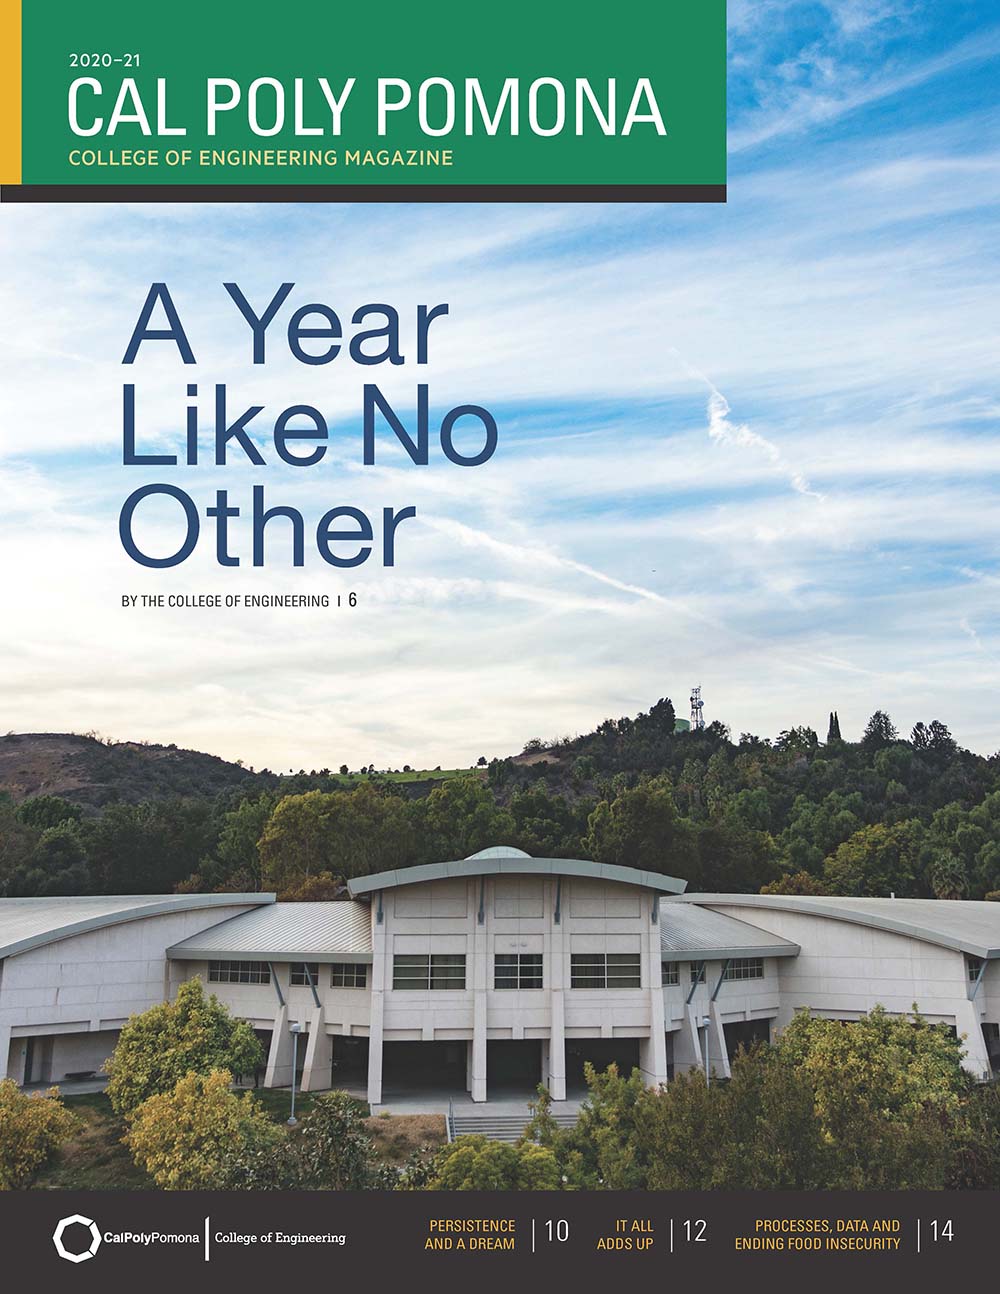 Cover of the 20-21 issue of the College of Engineering magazine